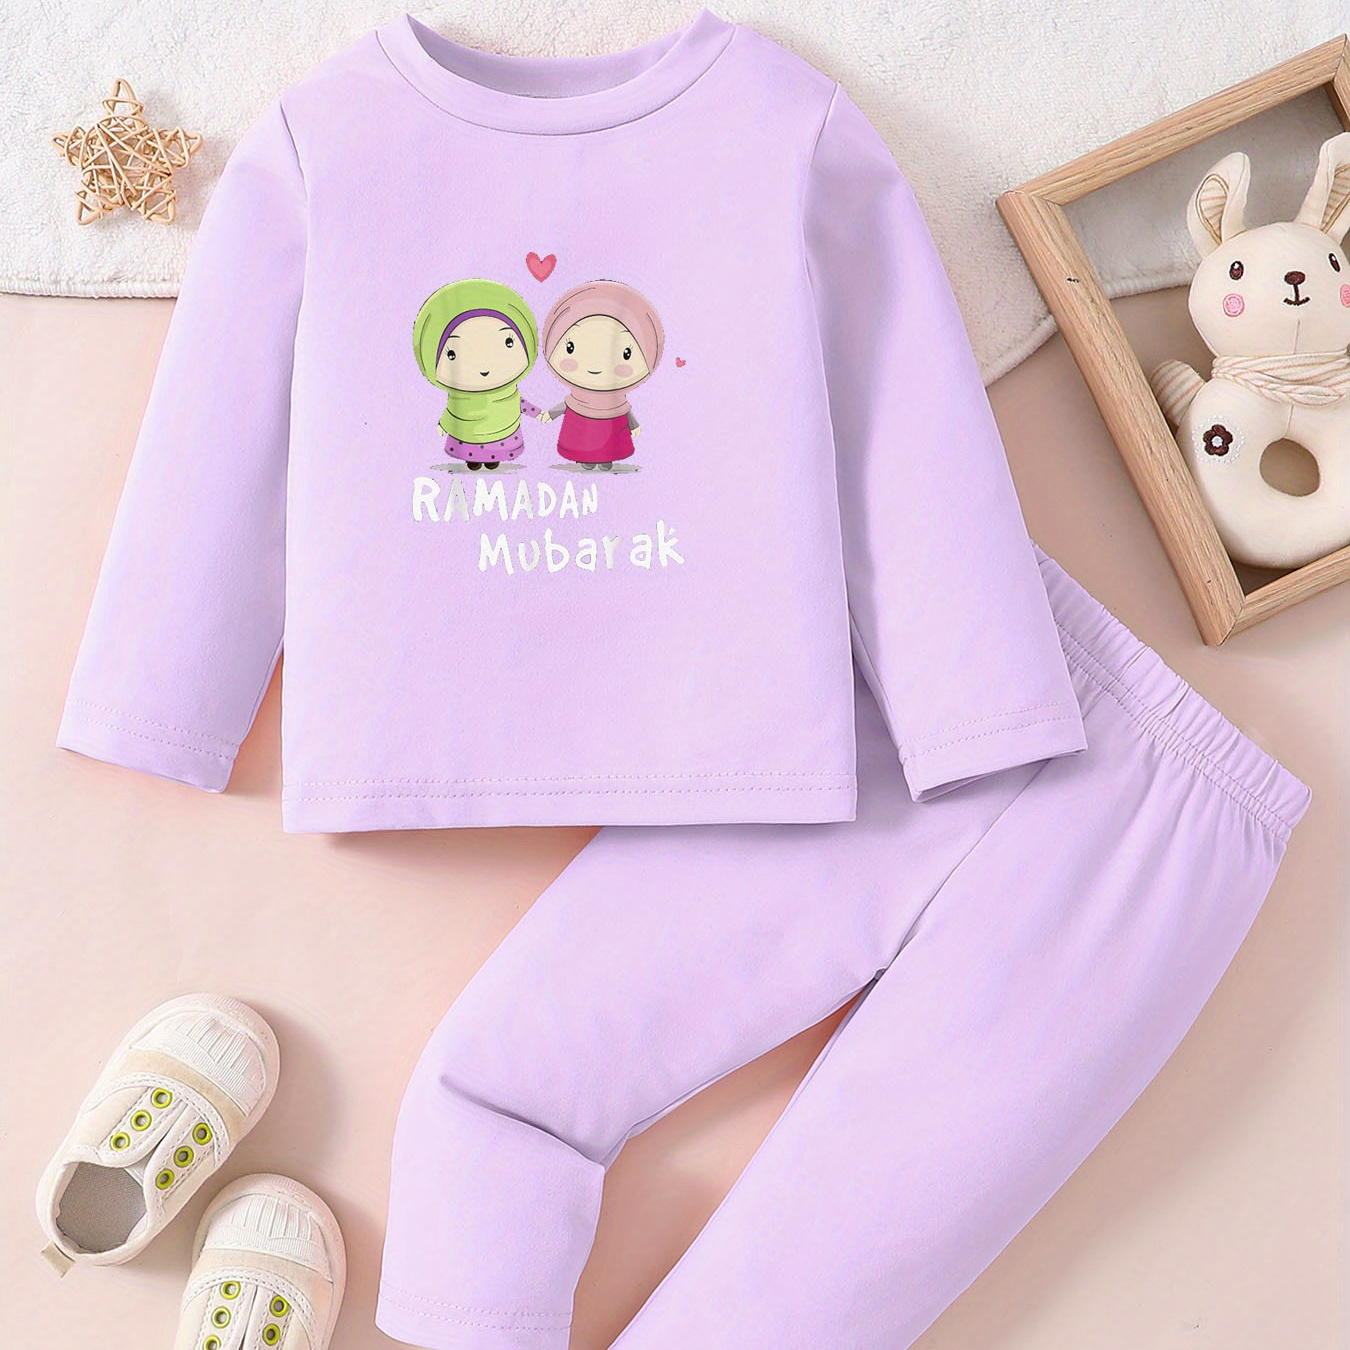 

Ramadan Mubarak And 2 Cute Cartoon Females Graphic Print, Toddler Girls' 2pcs Cotton Outfit, Comfy Long Sleeve Crew Neck T-shirt And Casual Pants Set For Fall And Winter, As Gifts